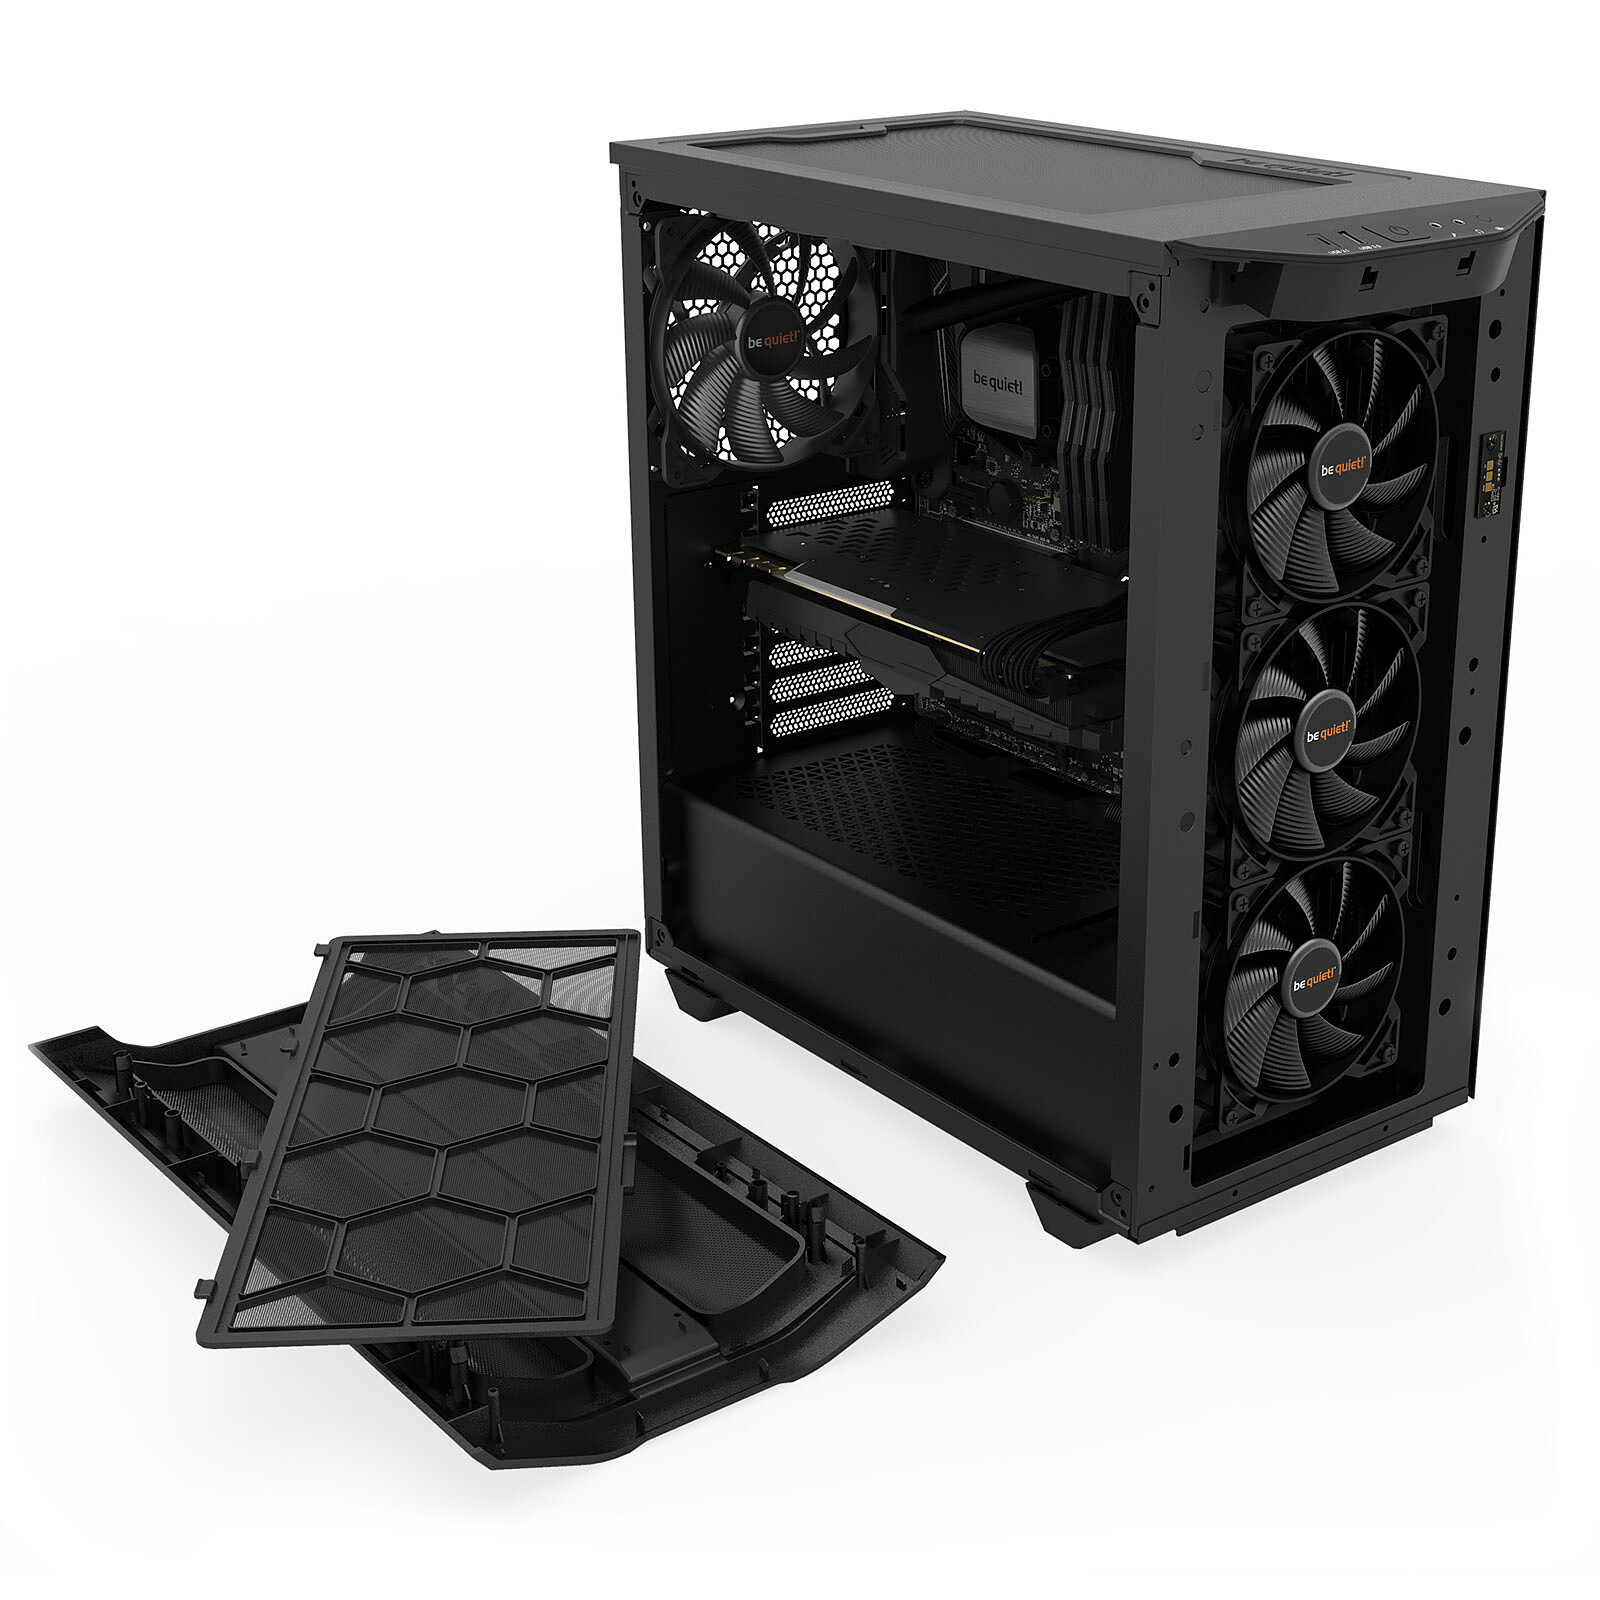 PURE BASE 500DX  White silent essential PC cases from be quiet!